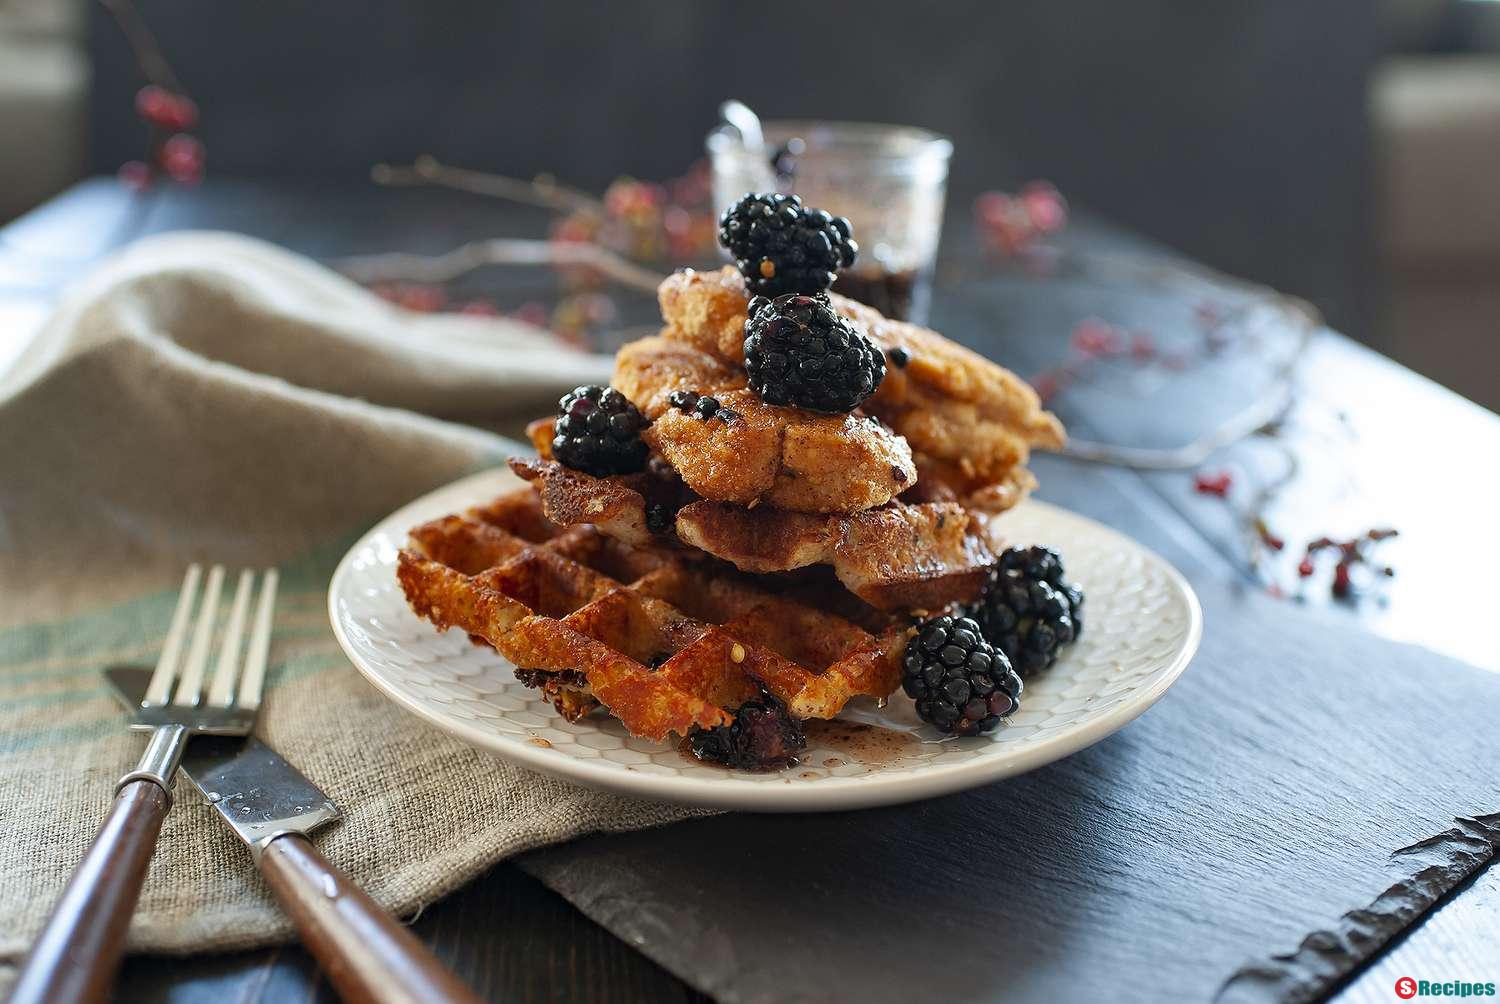 Spicy Gluten-Free Chicken and Cheddar Waffles with Blackberry-Maple Syrup